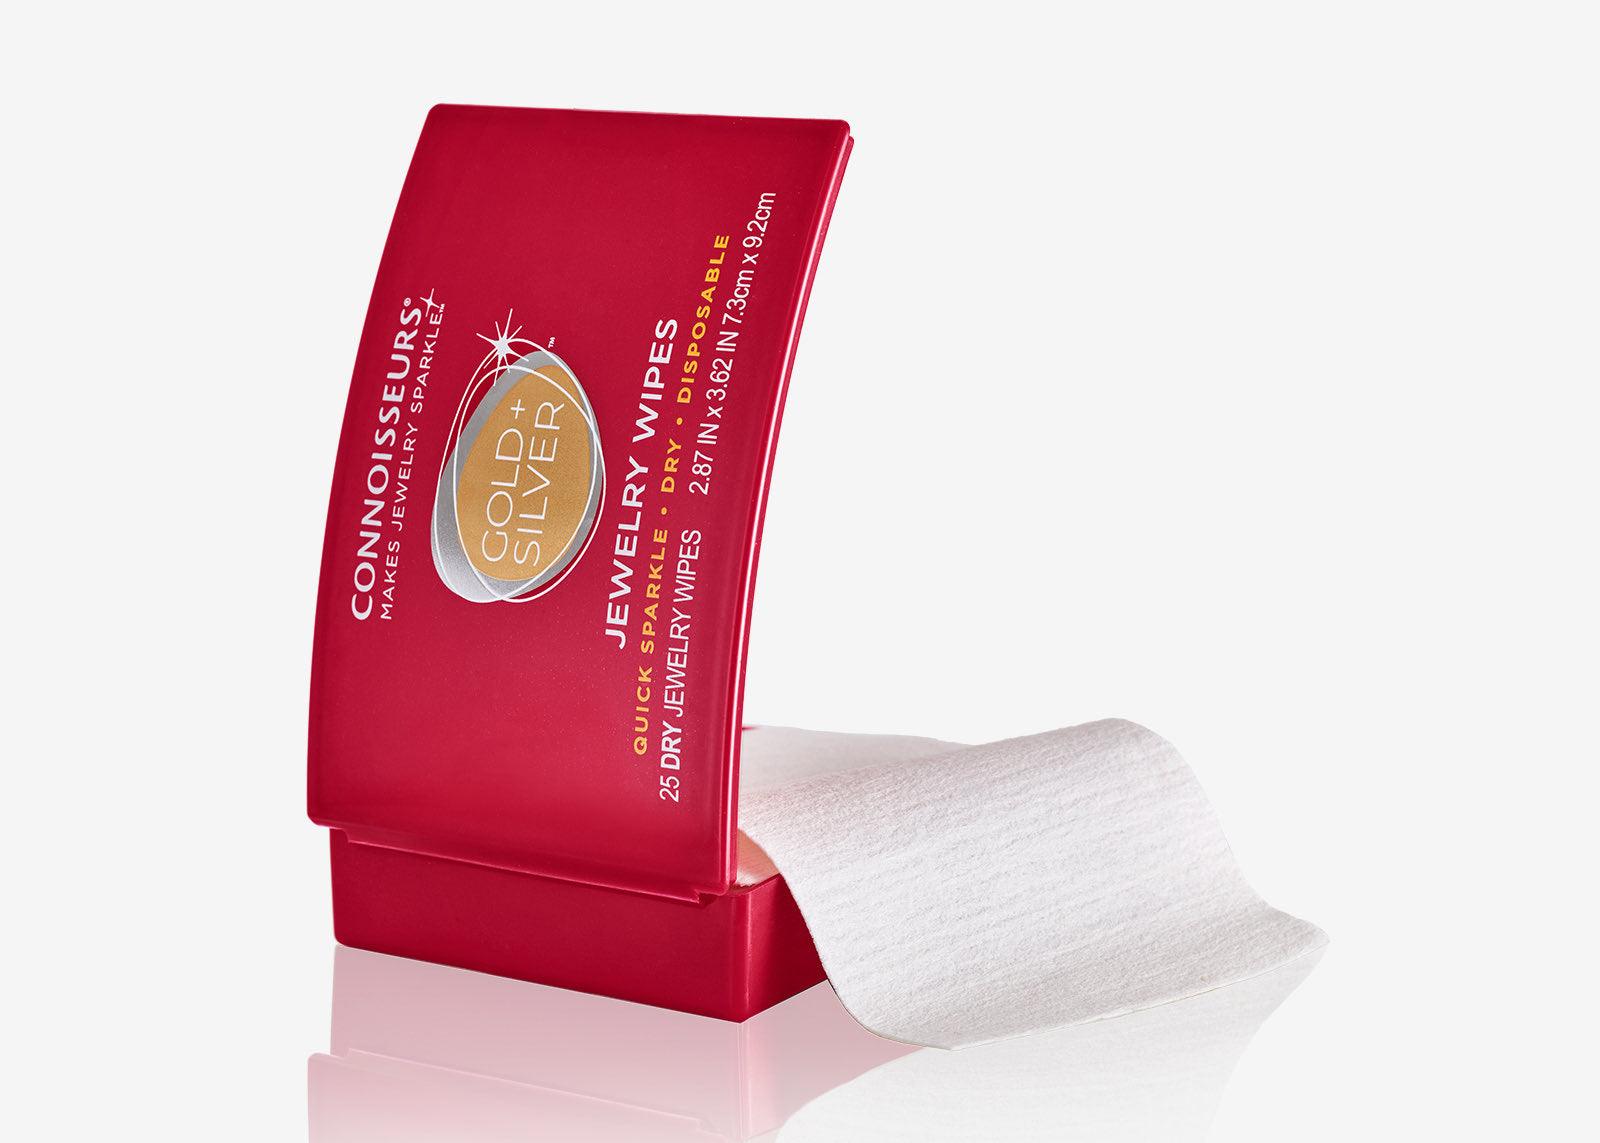 Connoisseurs Jewelry Wipes – Mount-N-Repair